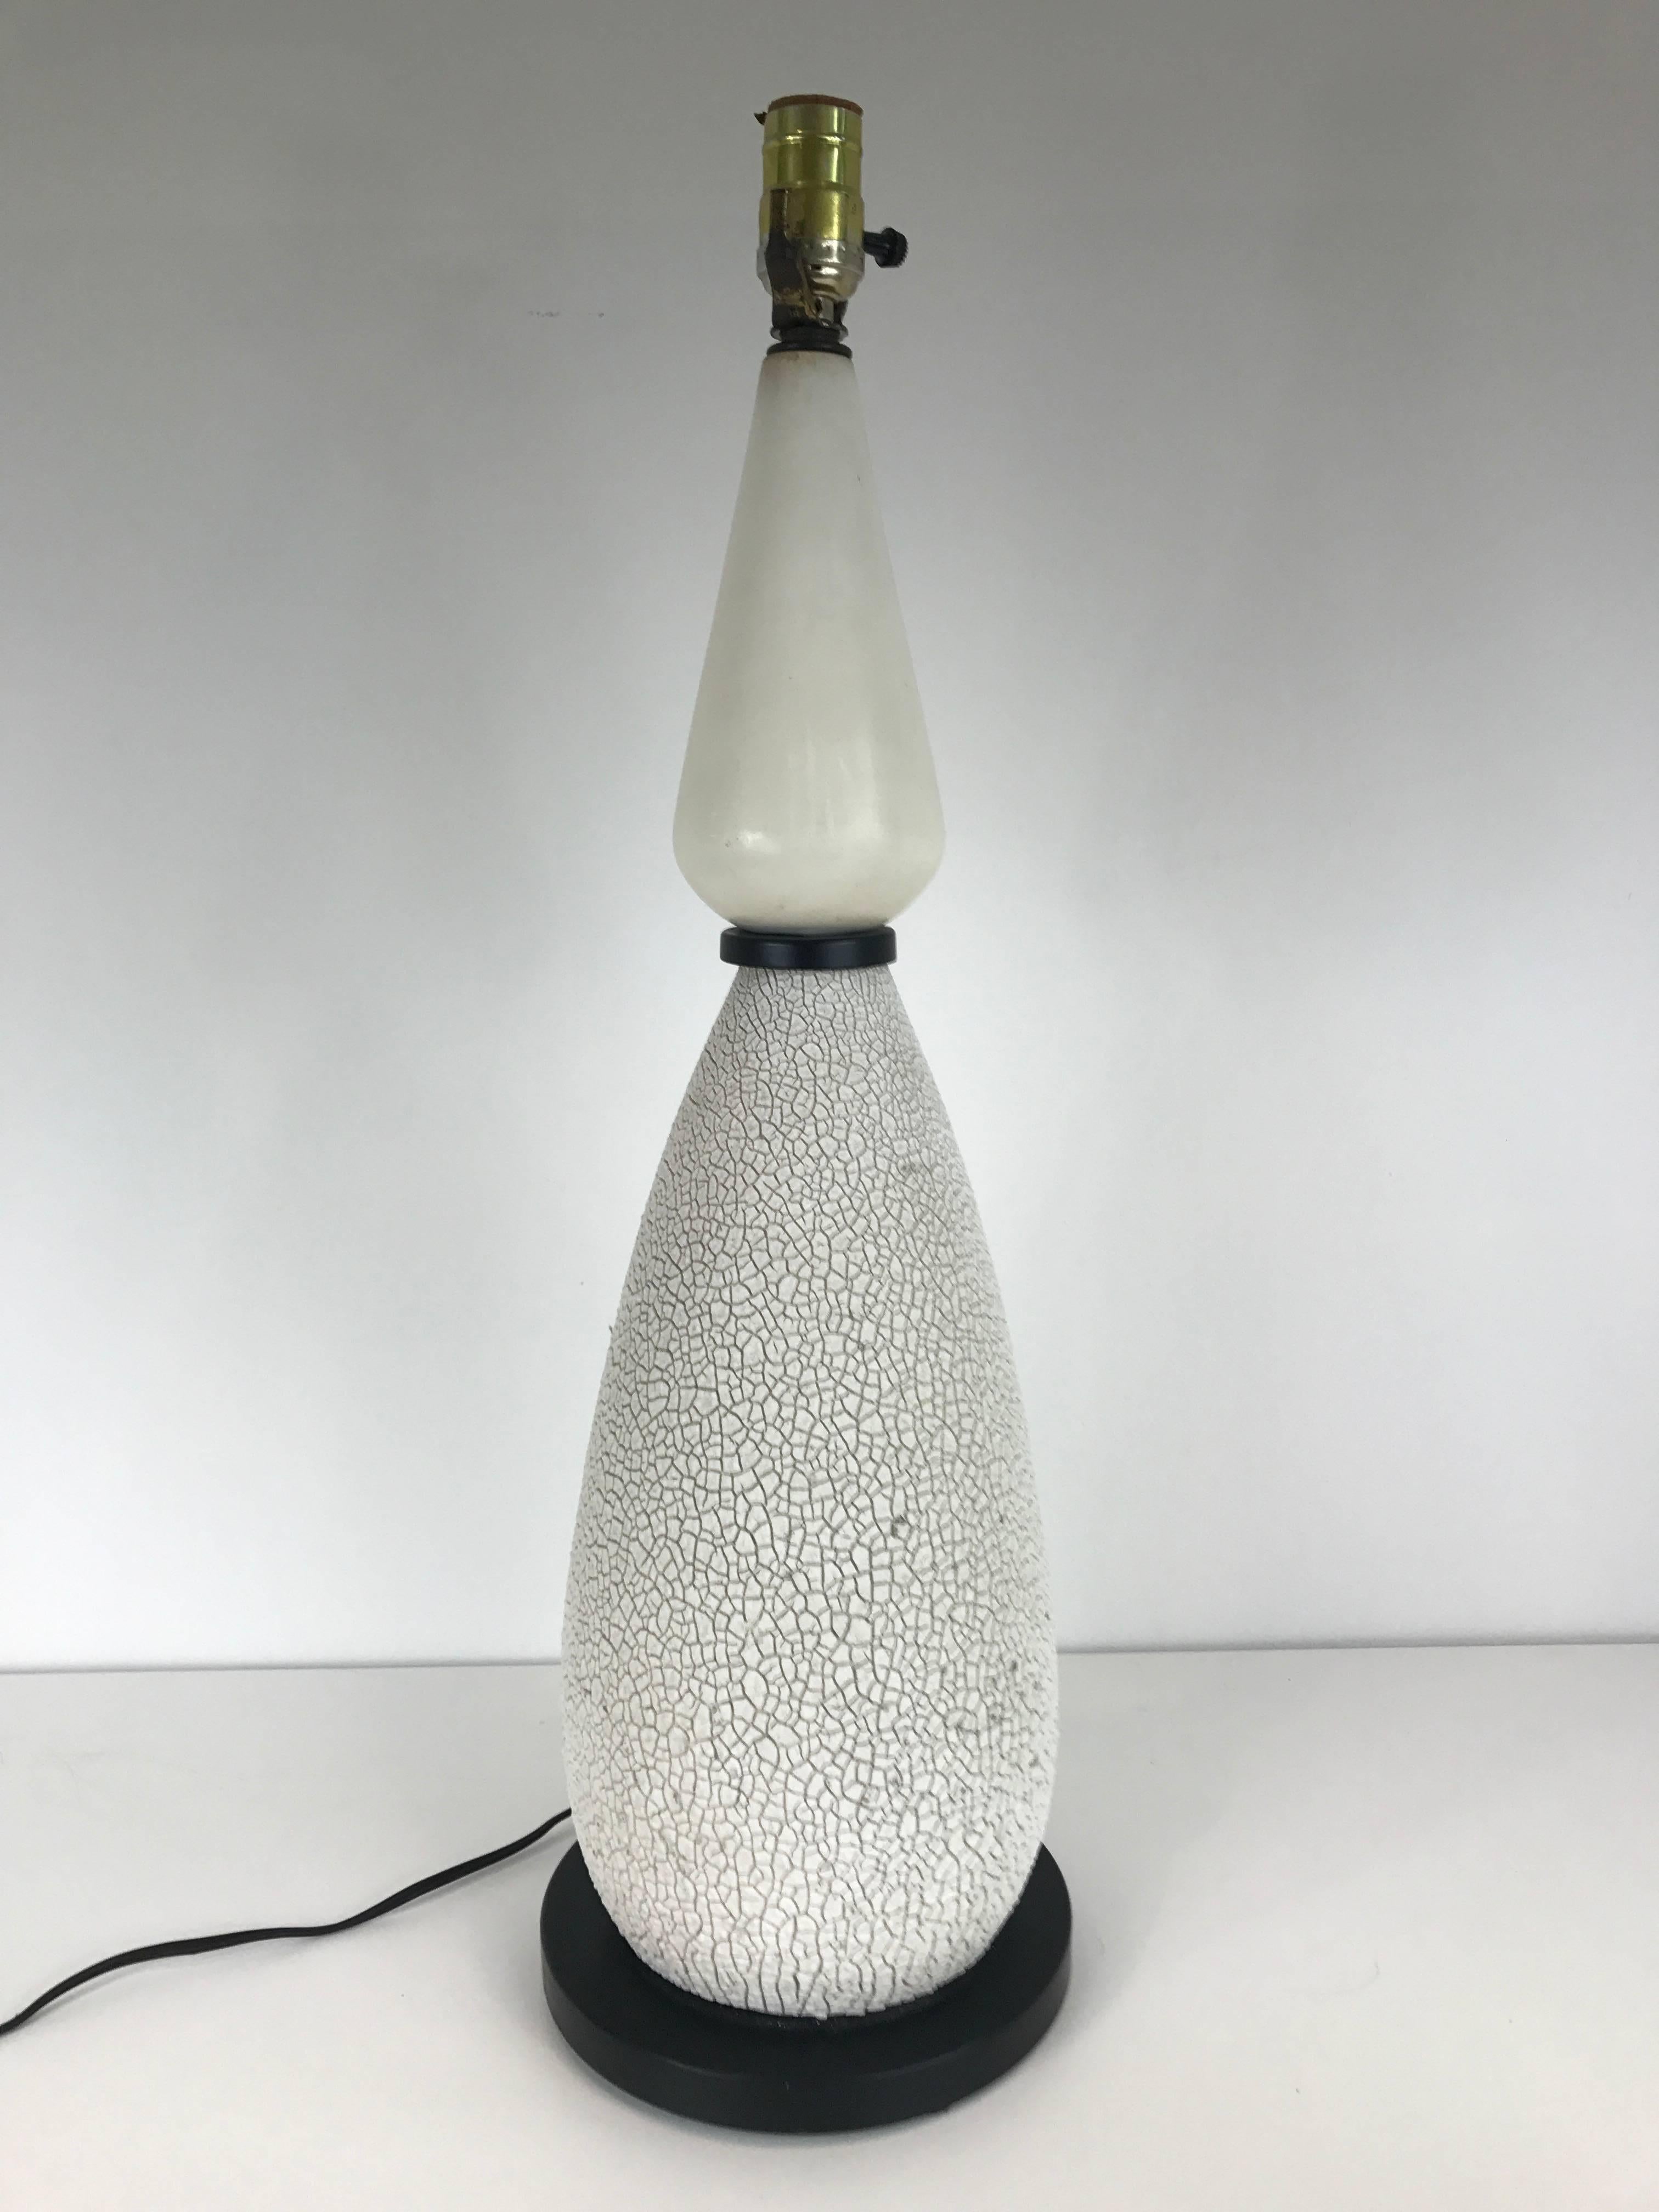 Pair of Midcentury Ceramic Table Lamps In Good Condition For Sale In Stockton, NJ